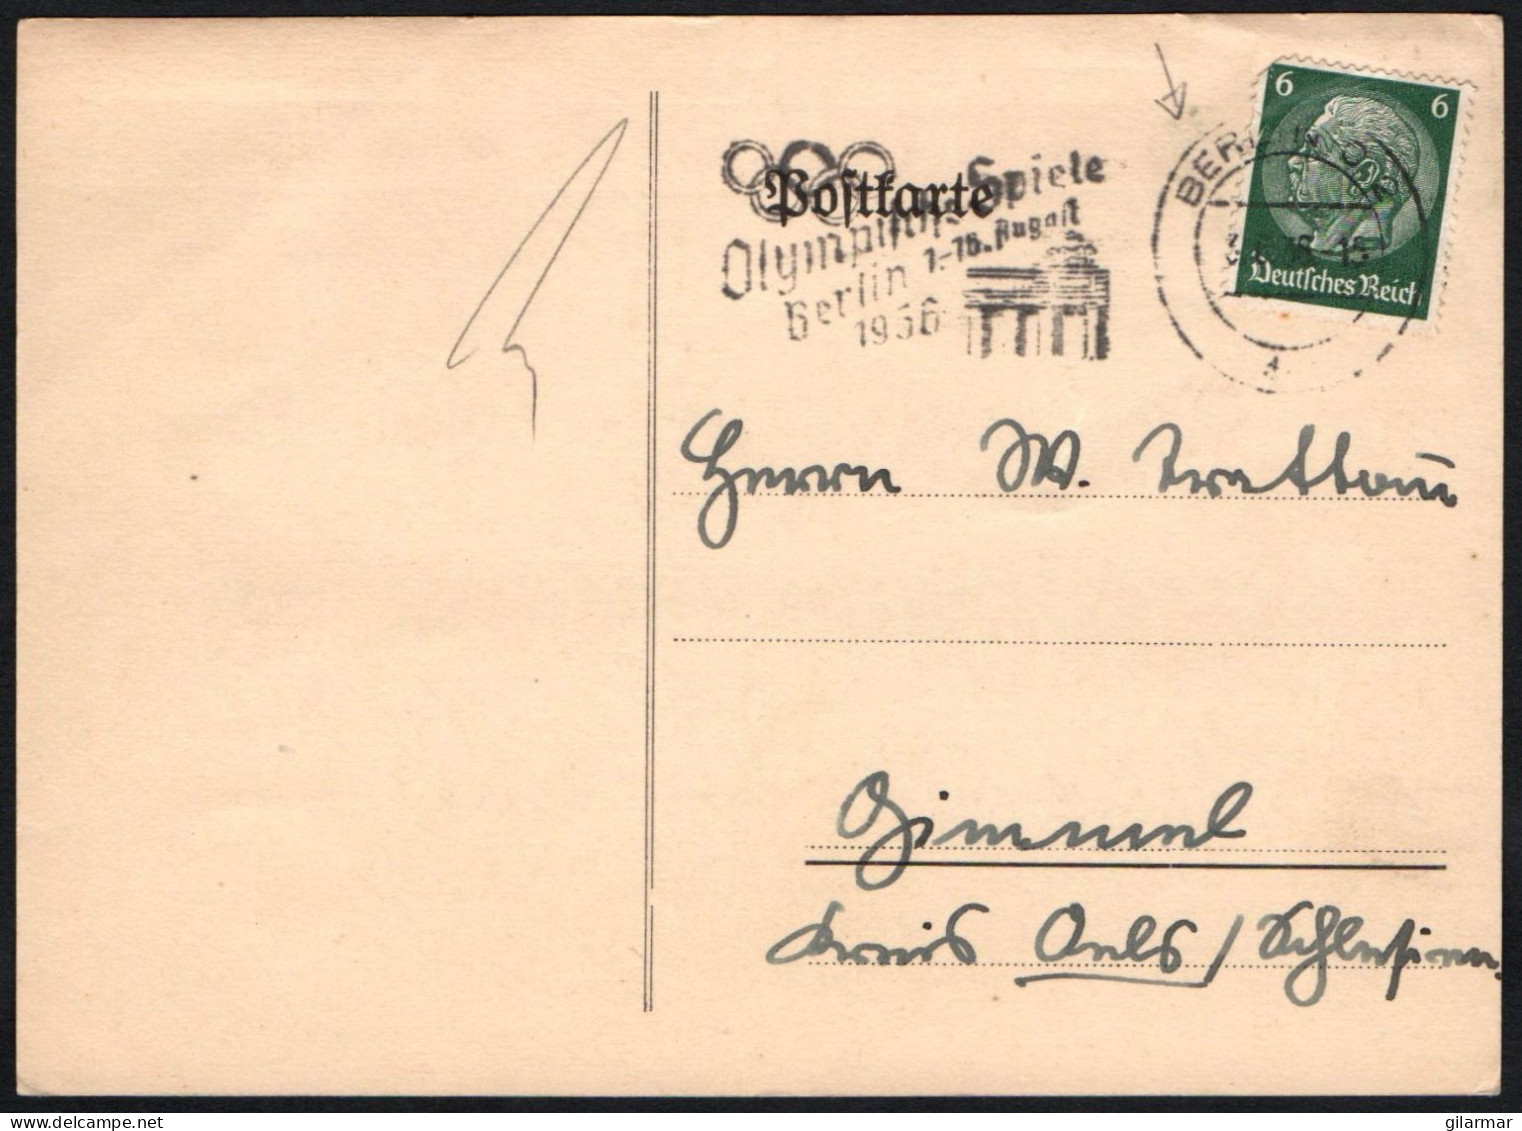 GERMANY BERLIN 1936 - OLYMPIC GAMES BERLIN '36 - MAILED CARD - G - Sommer 1936: Berlin